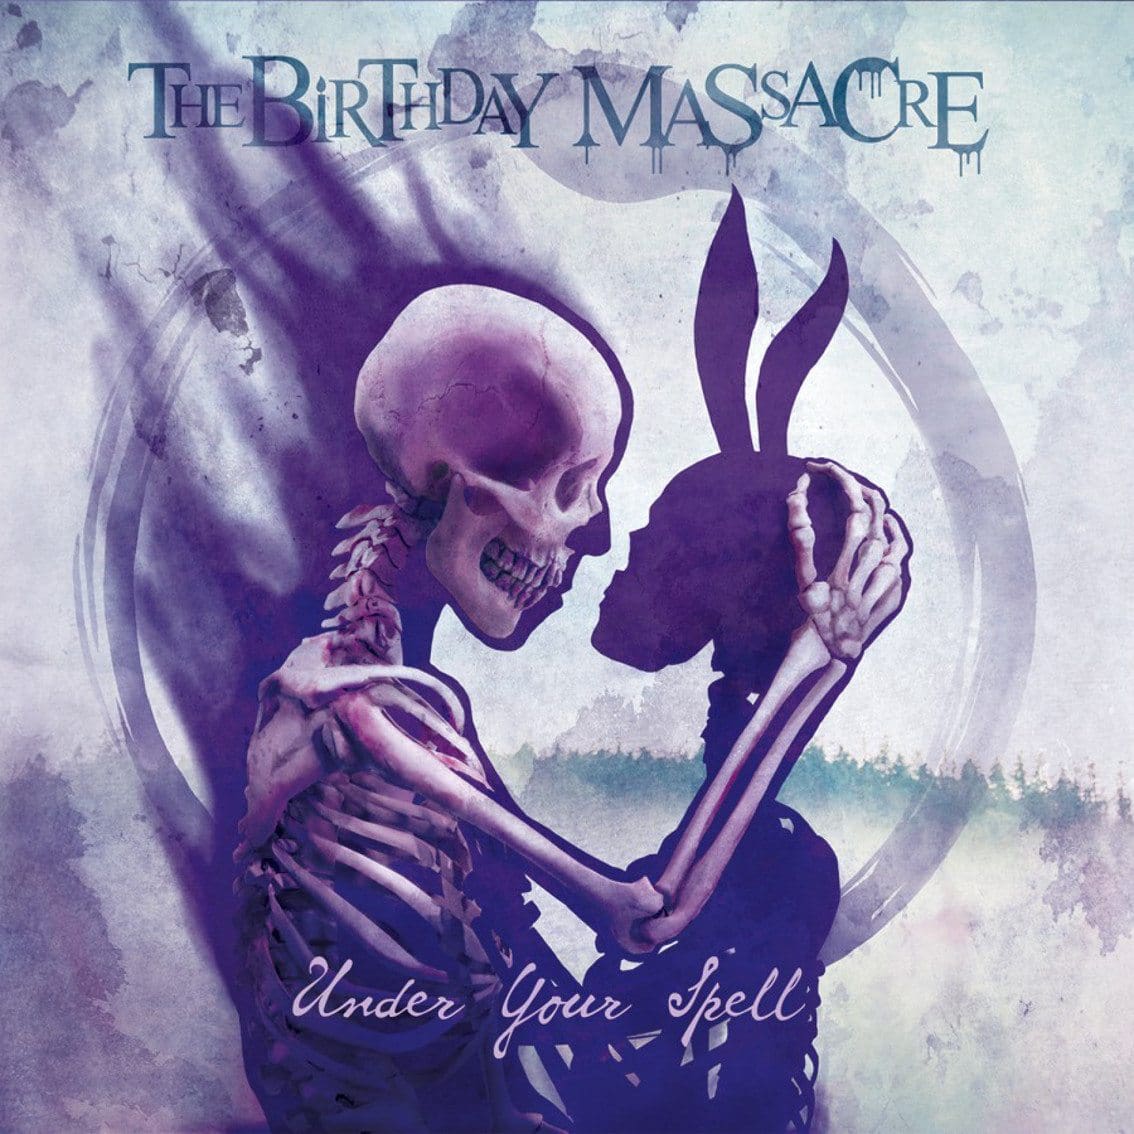 Listen to a preview of the new The Birthday Massacre album 'Under your spell' expected for June on CD and vinyl (pre-orders included)